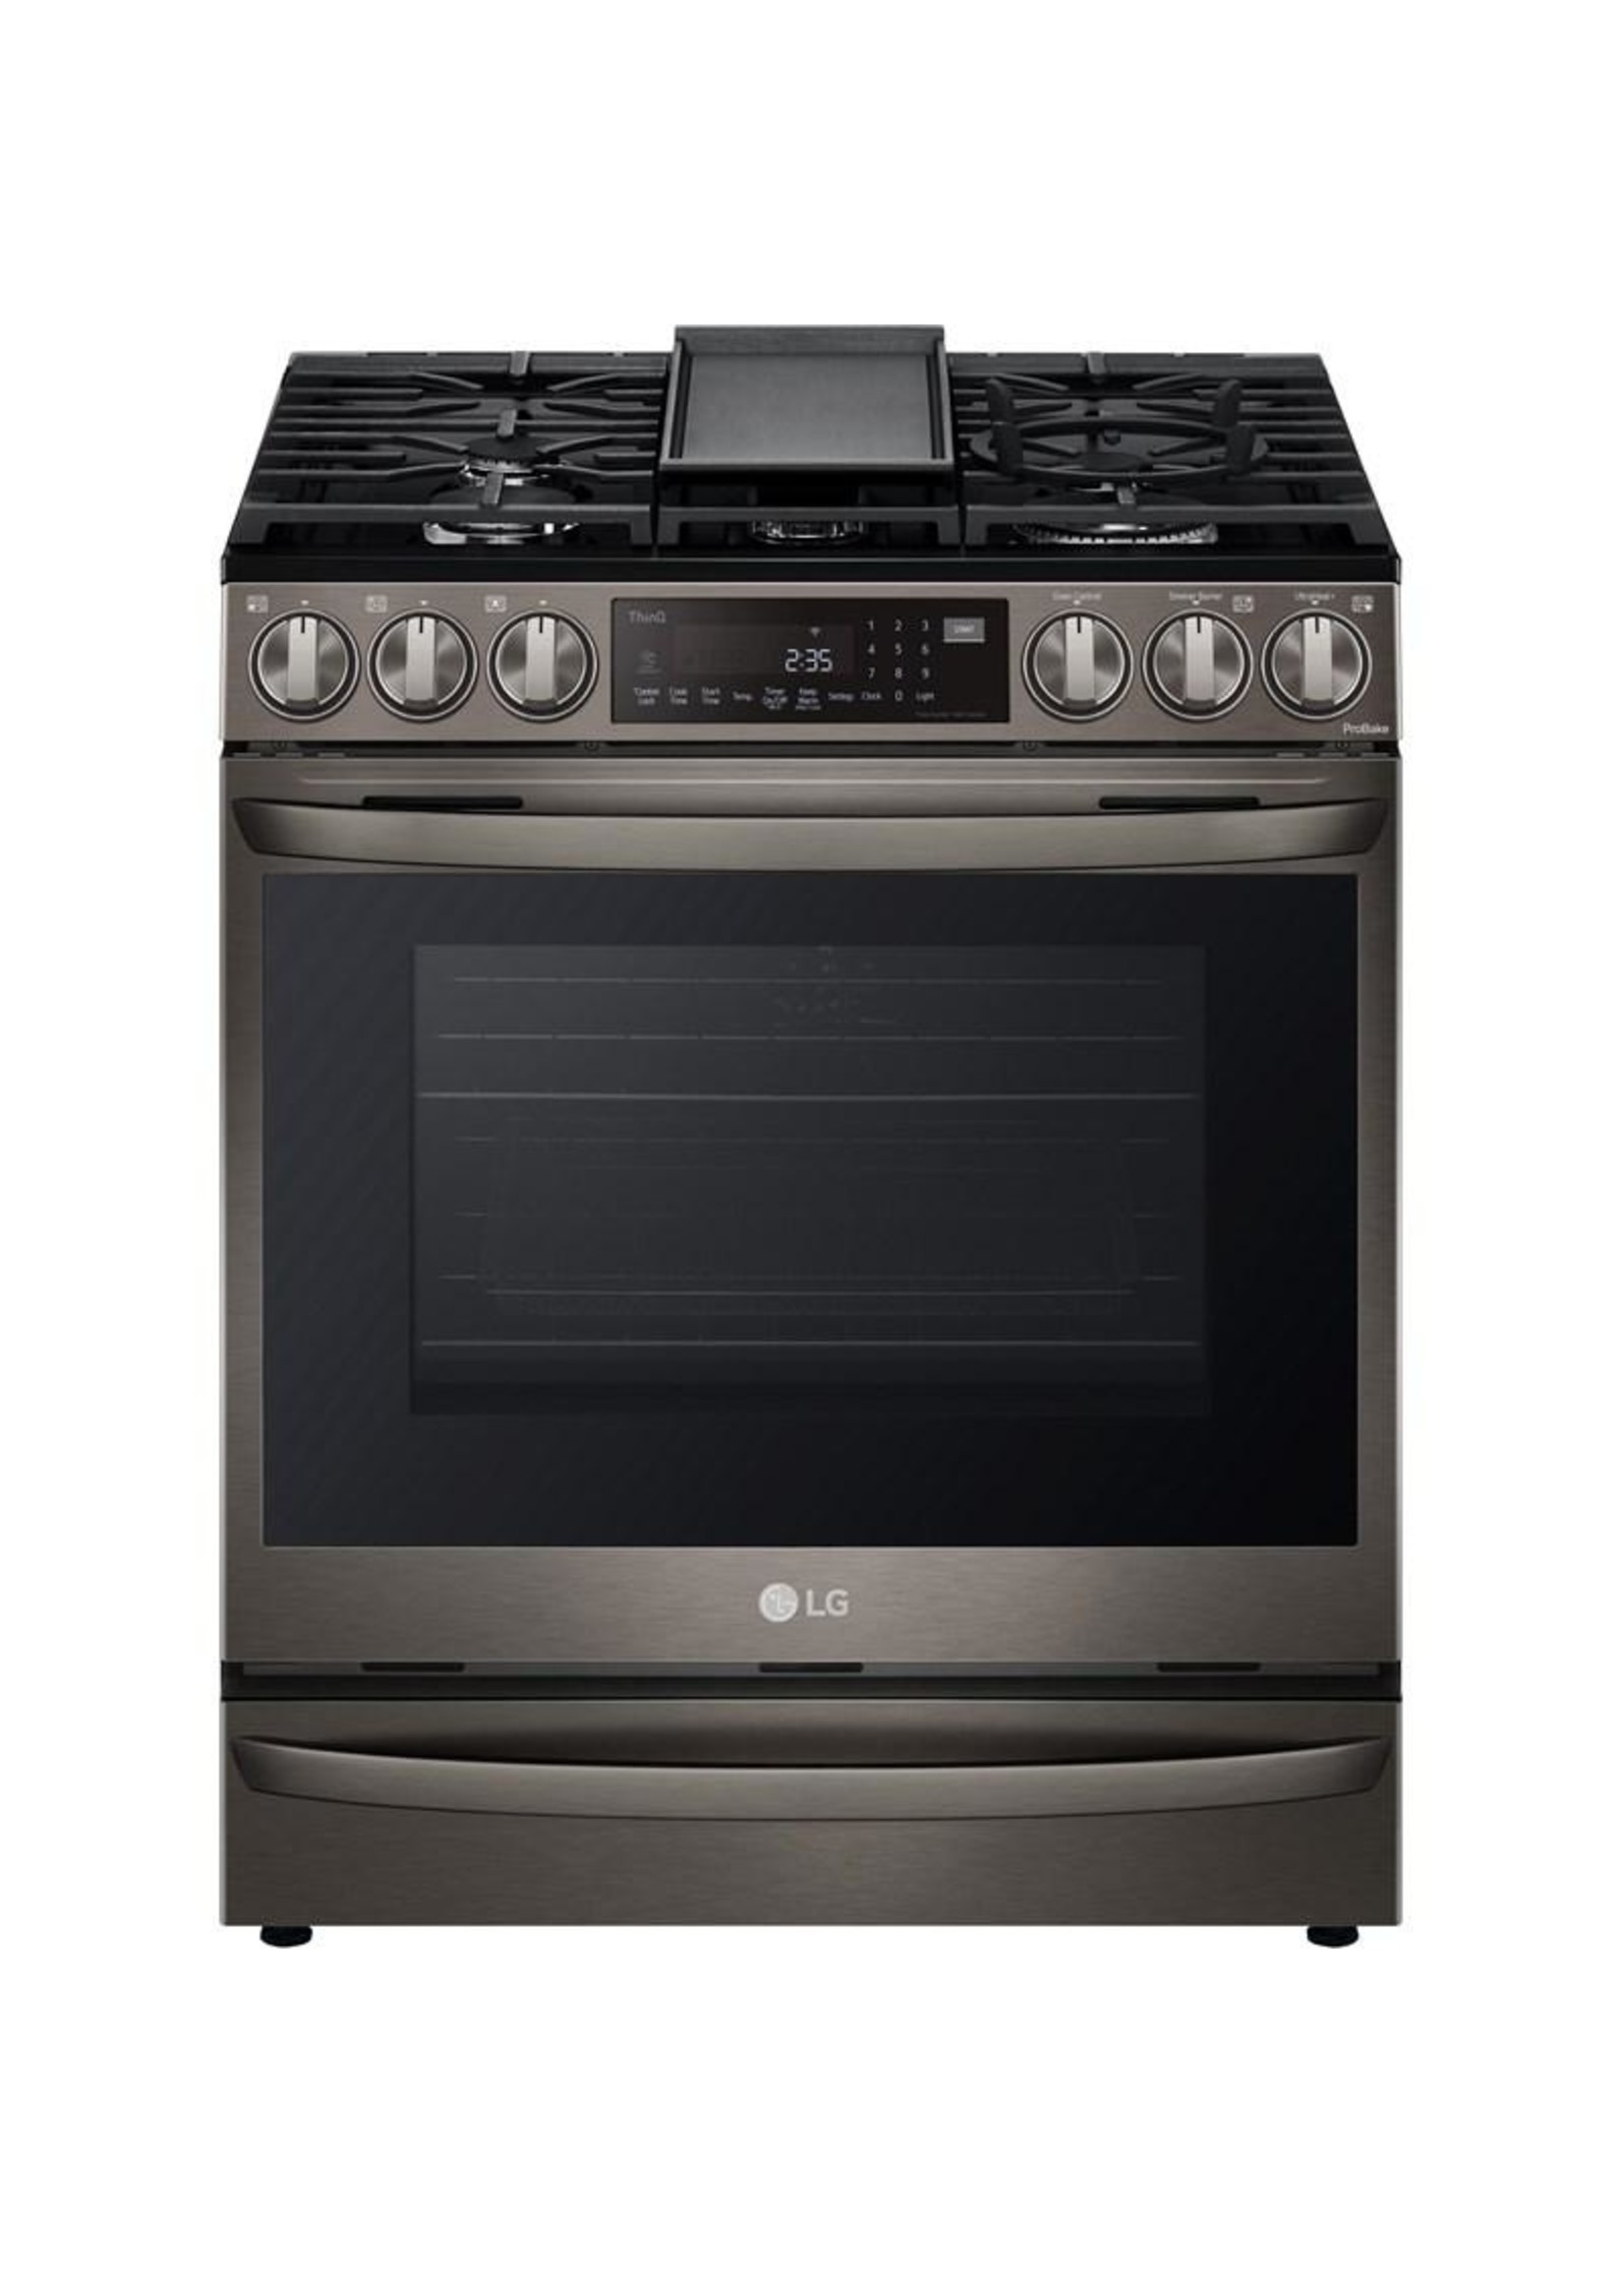 LG LG Electronics 6.3 cu. ft. Smart Slide-in Gas Range with ProBake Convection & Air Sous Vide in PrintProof Black Stainless Steel